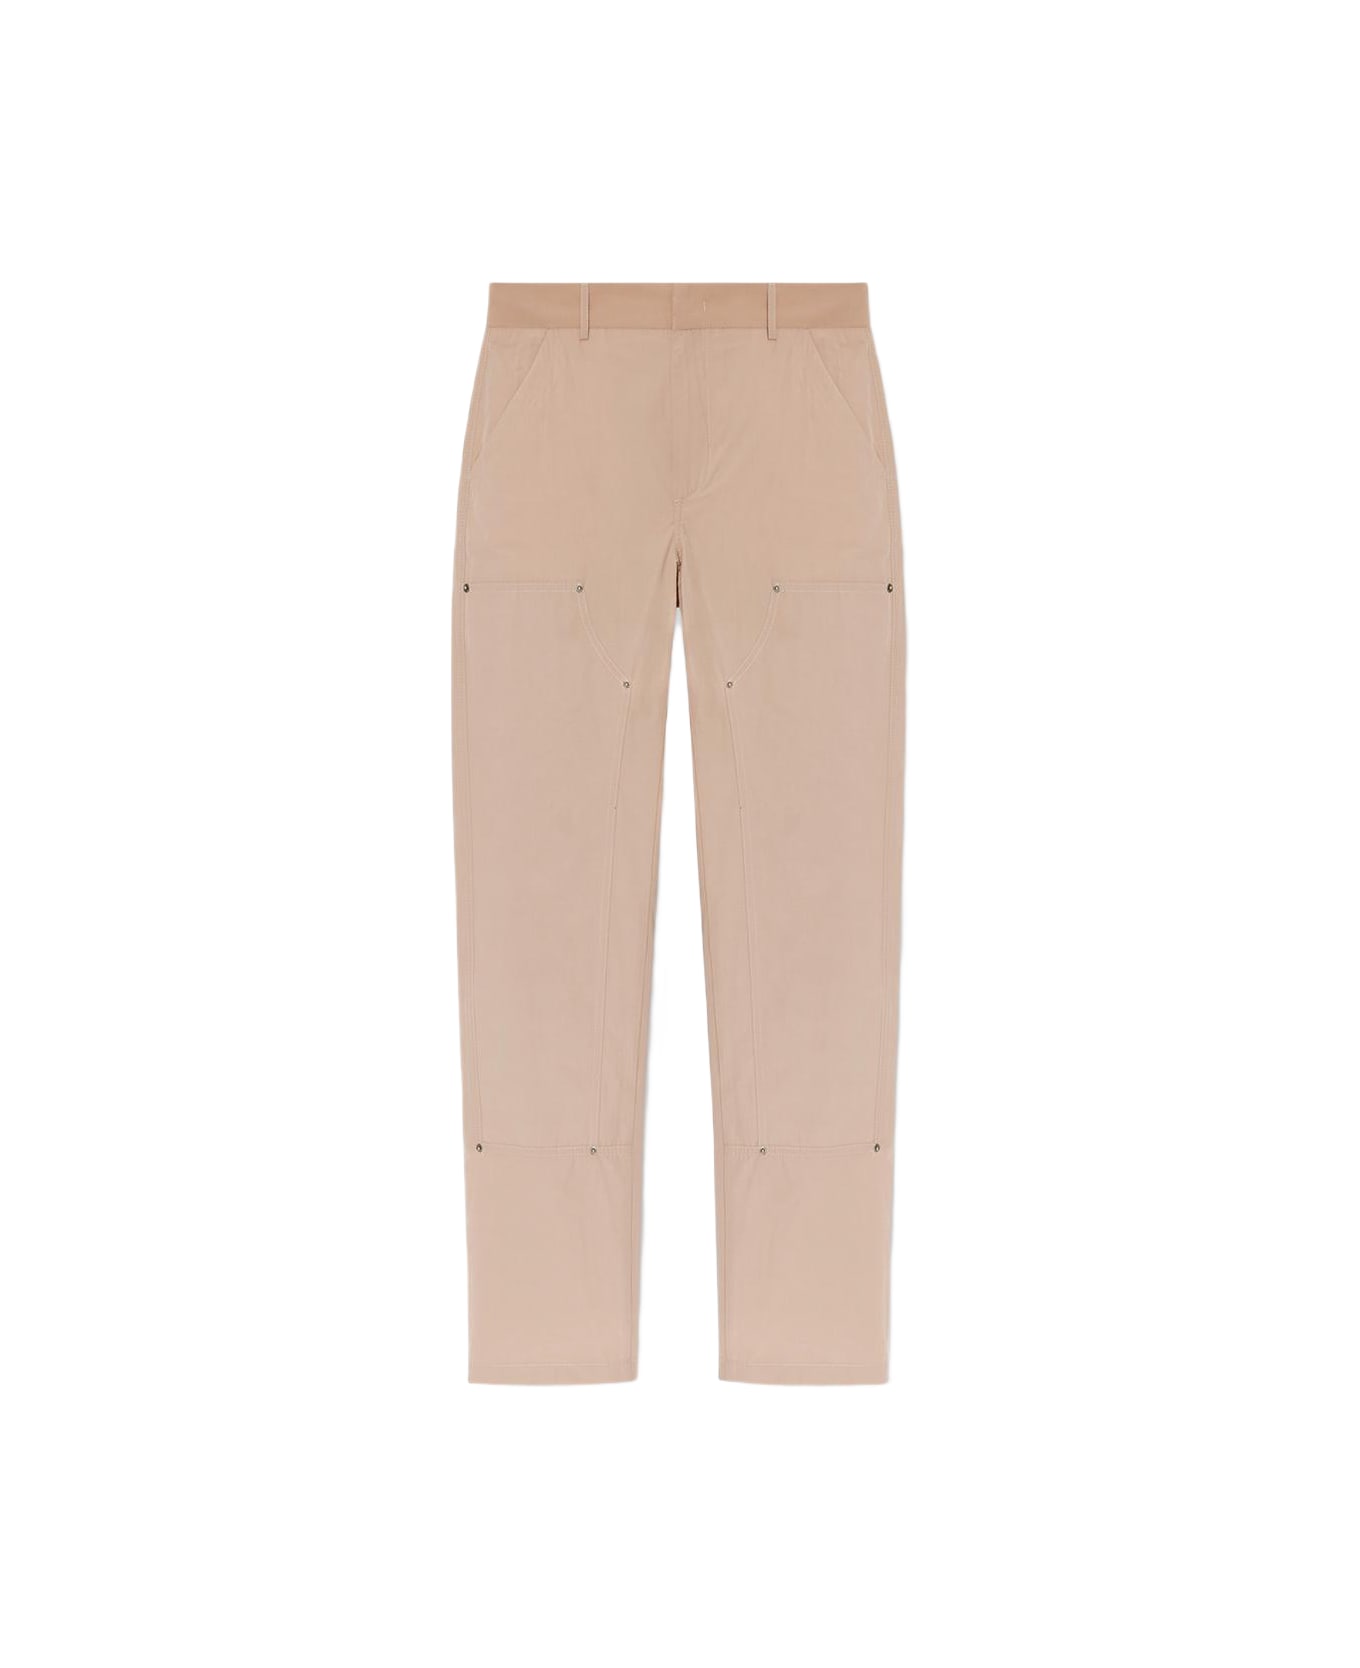 FourTwoFour on Fairfax Trousers With Pockets - BEIGE ボトムス